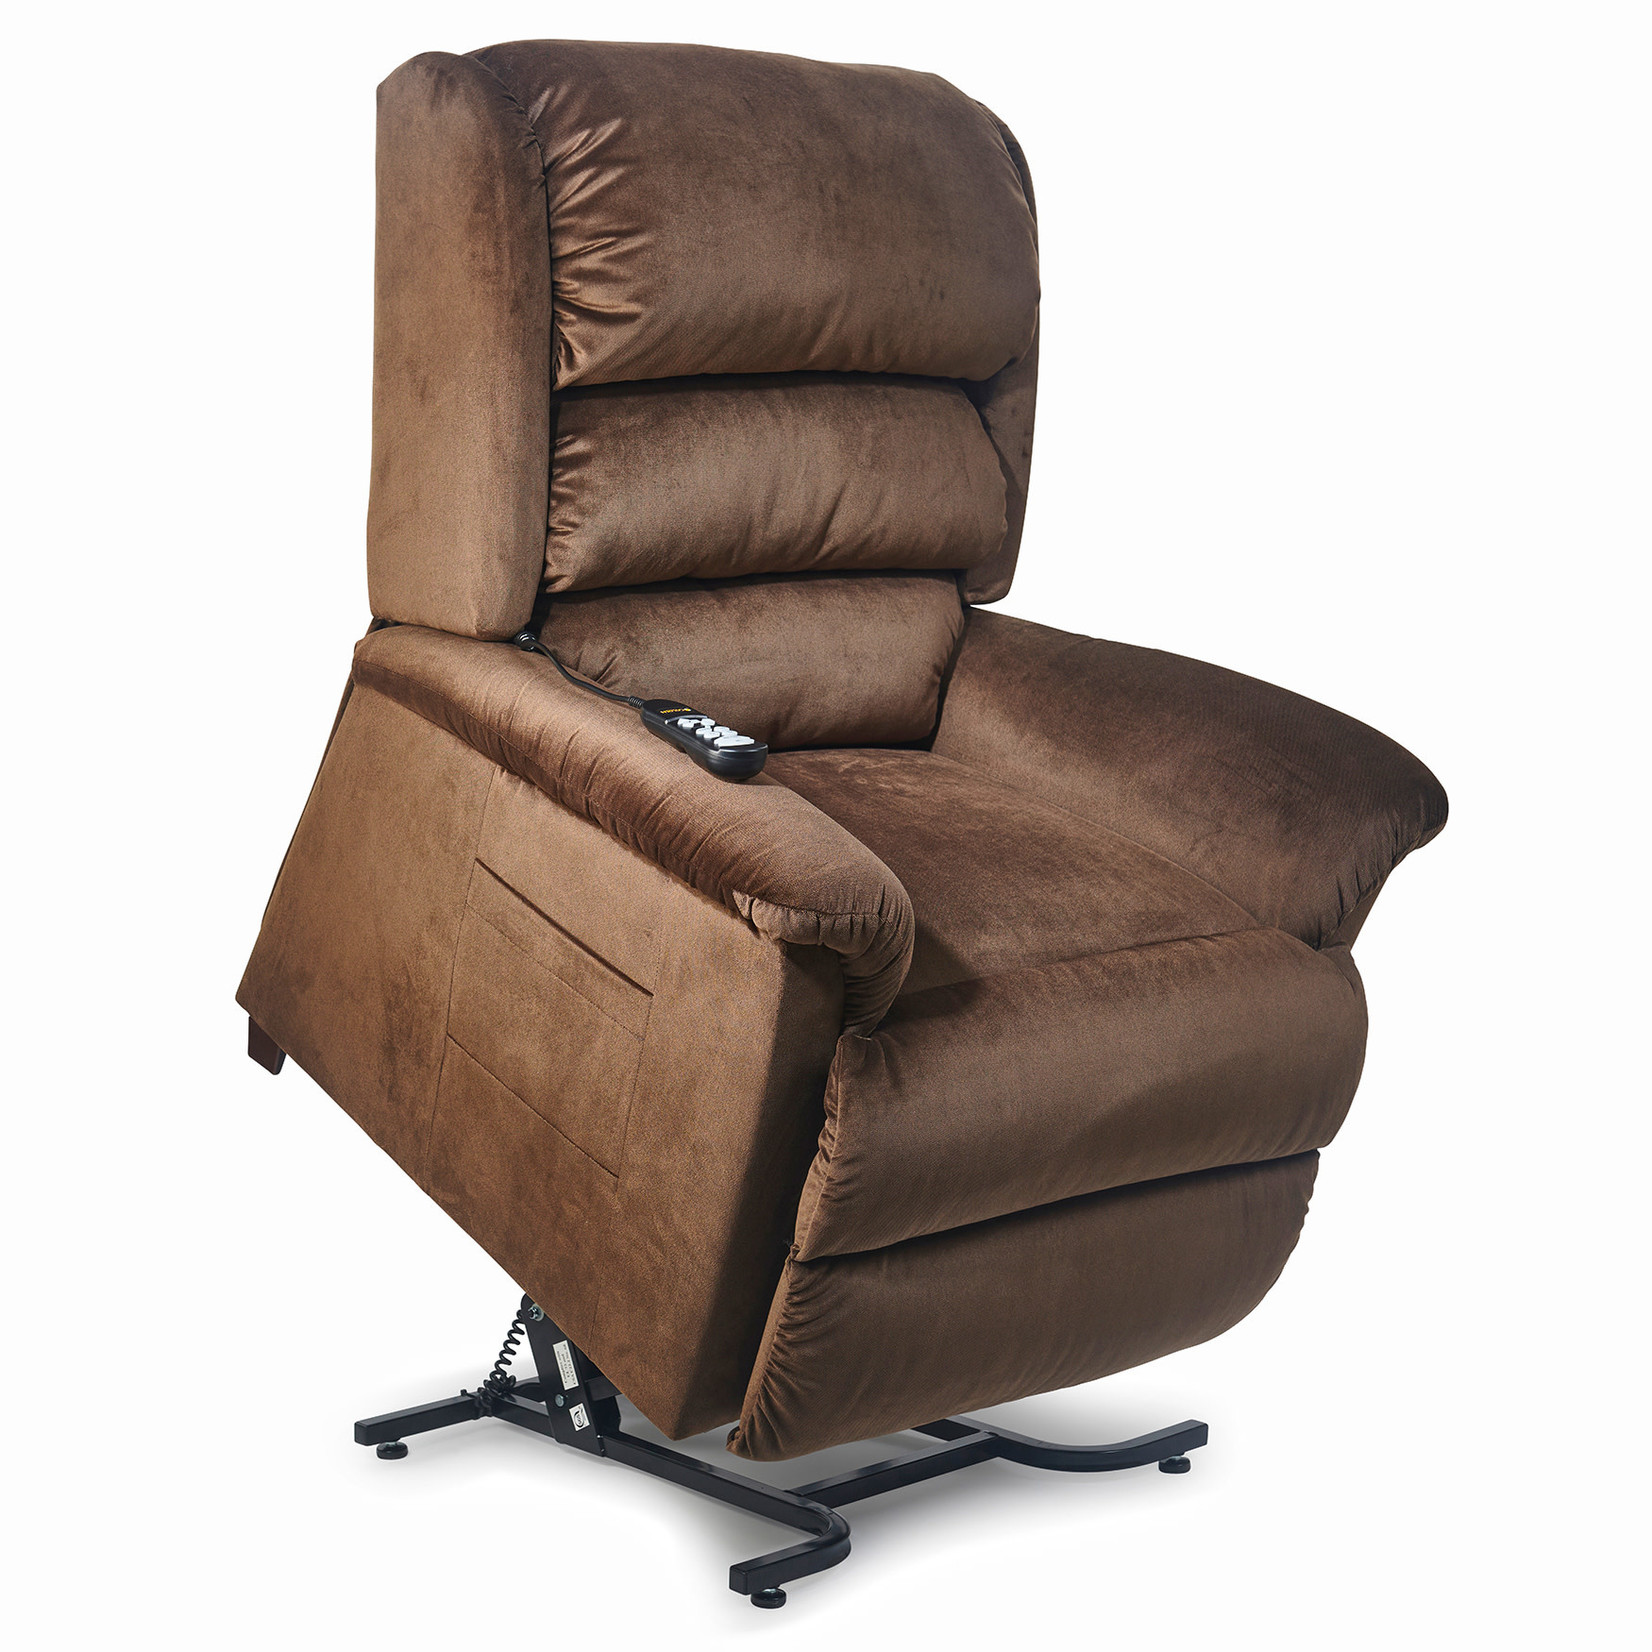 Golden Relaxer with MaxiComfort Ultimate Recline Lift Chair